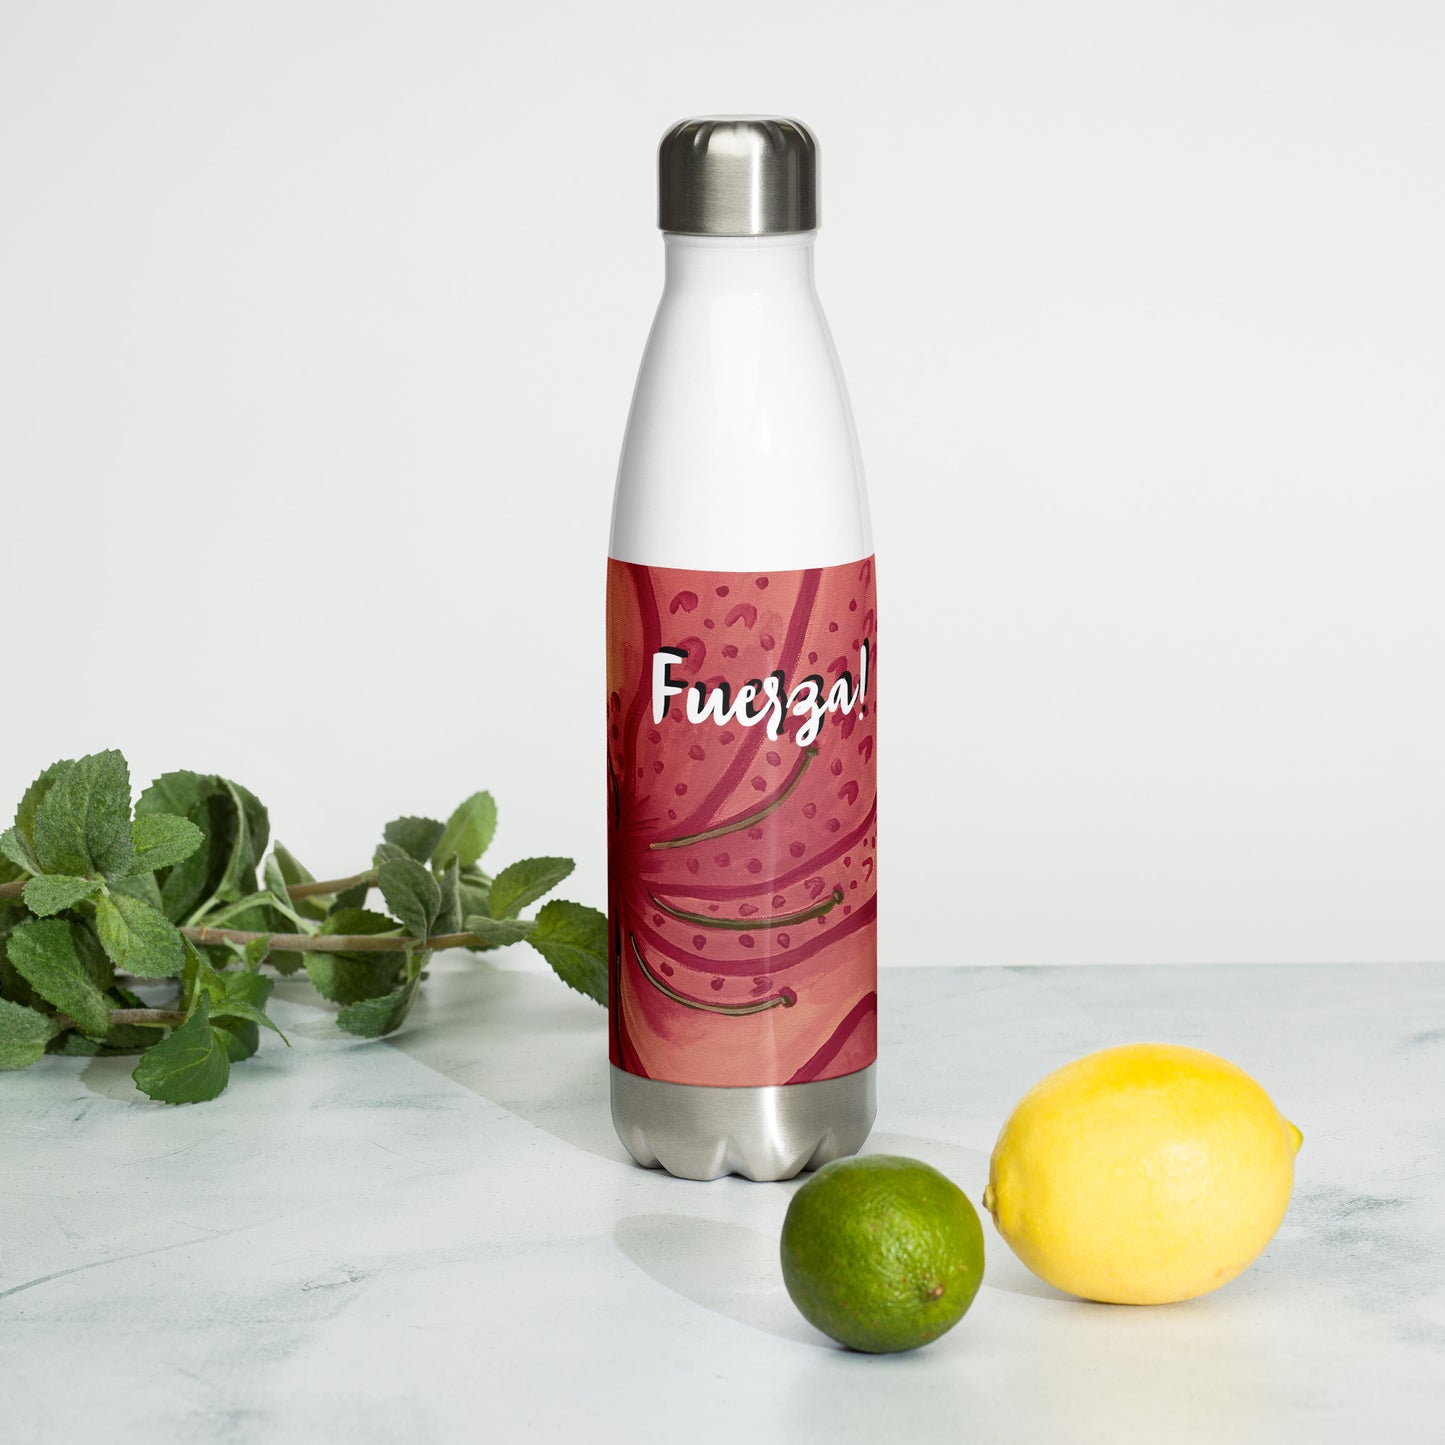 Fuerza by Irma Stainless steel water bottle